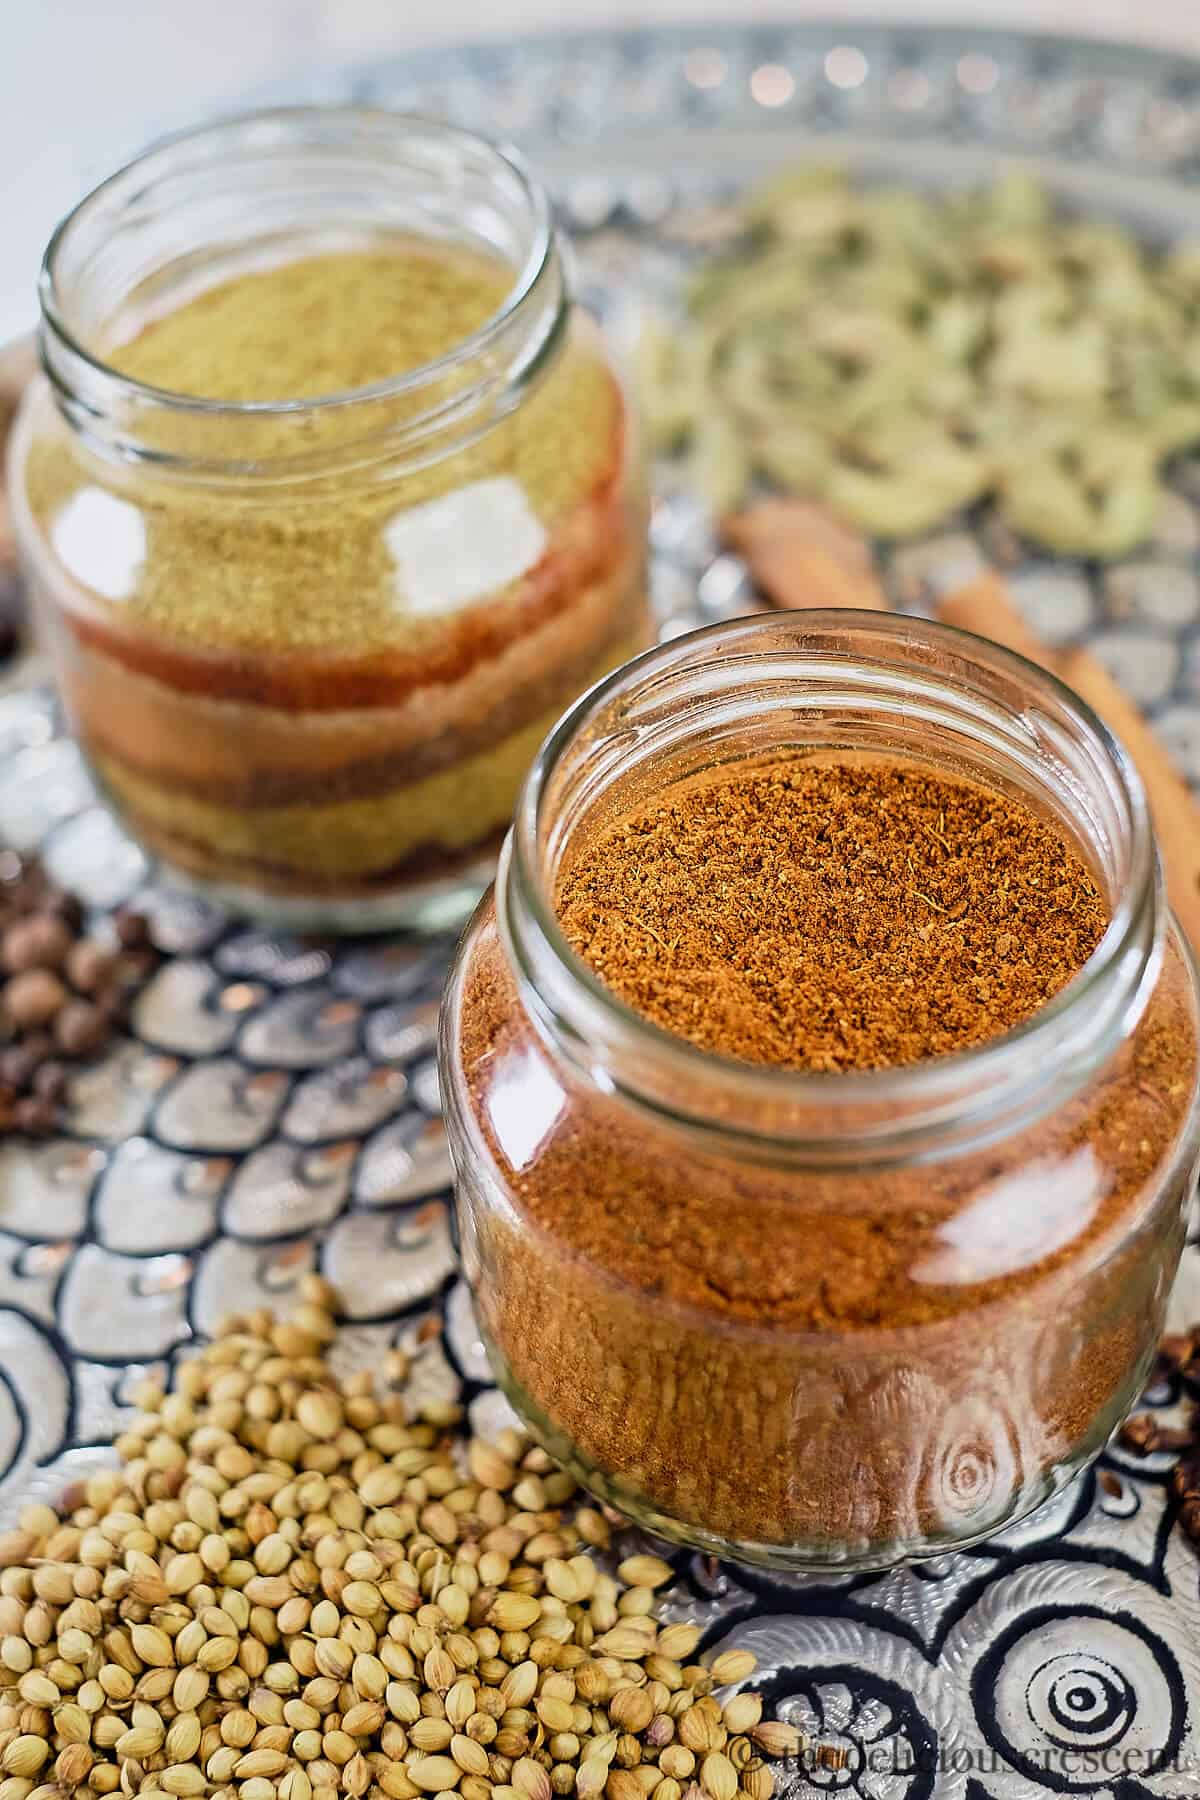 Two bottles of baharat spice blend placed on a platter.